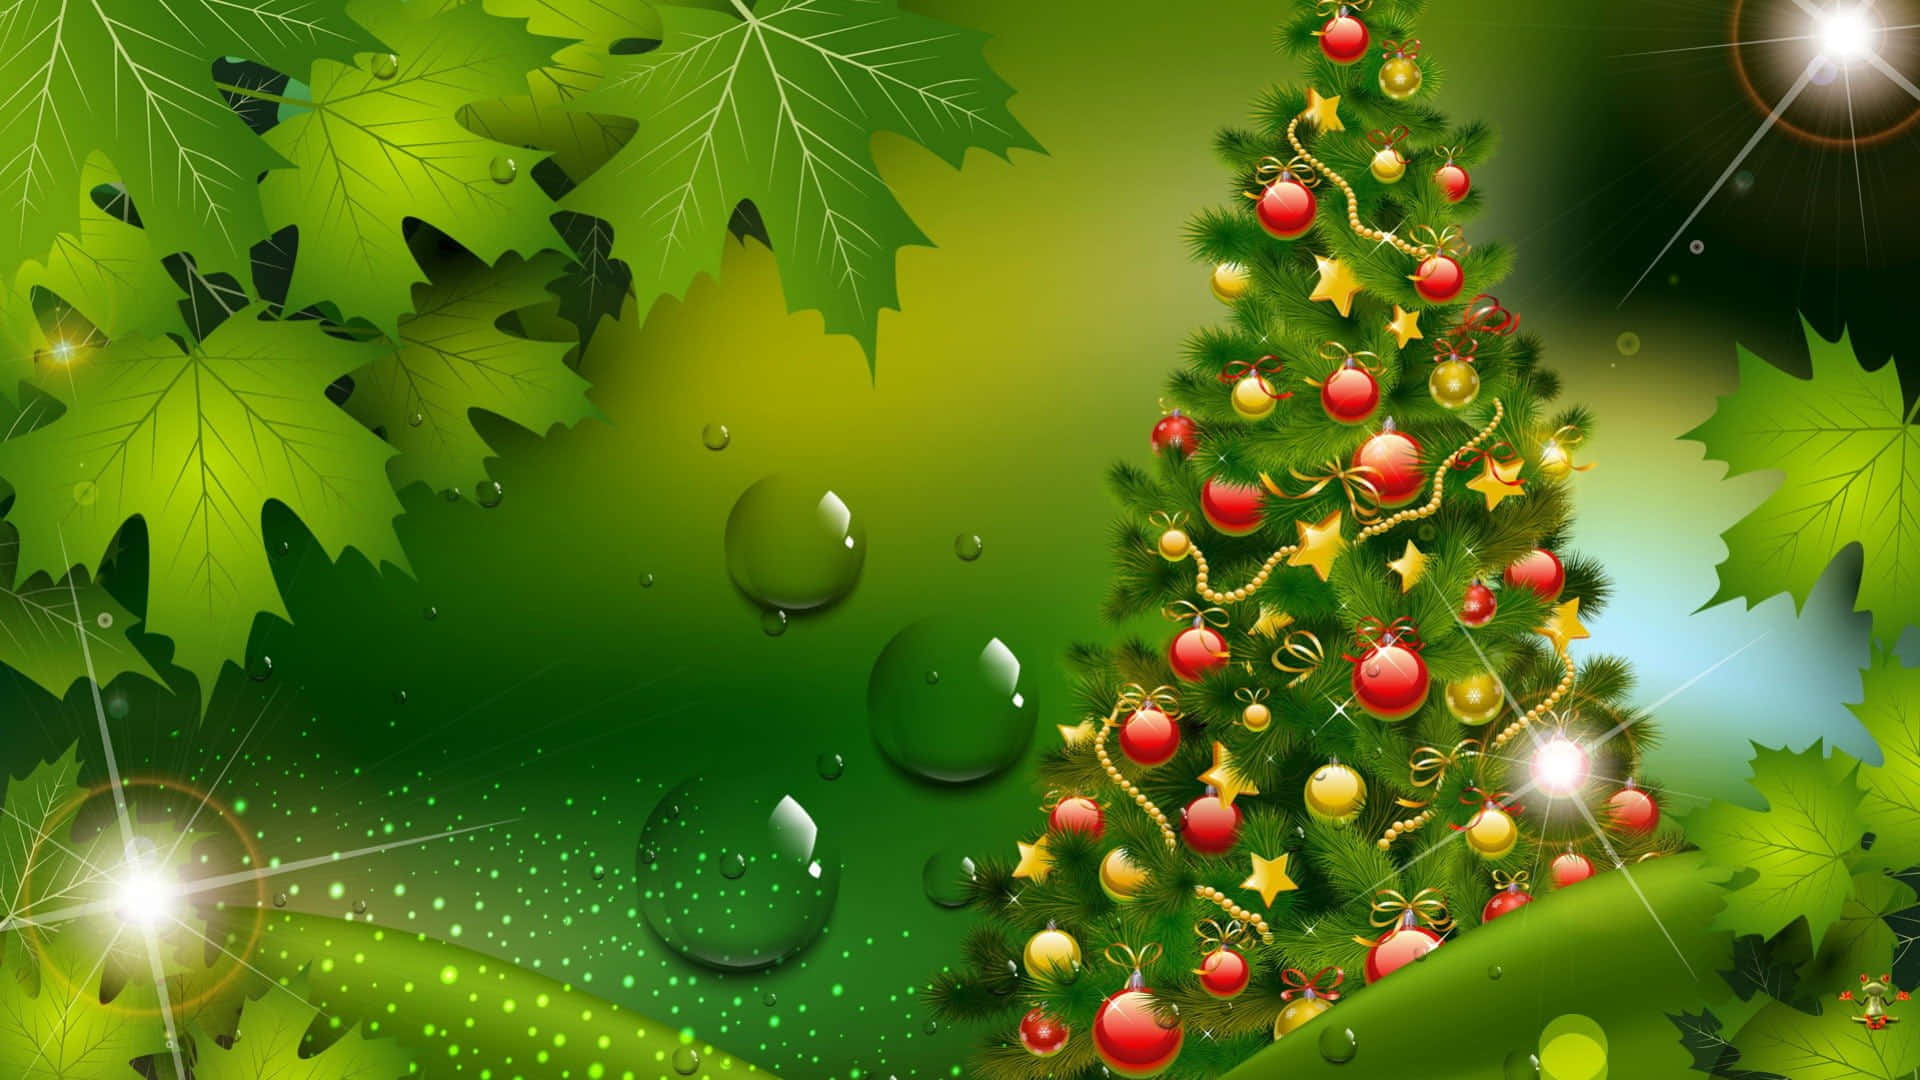 Celebrate The Holidays With A Green Christmas!